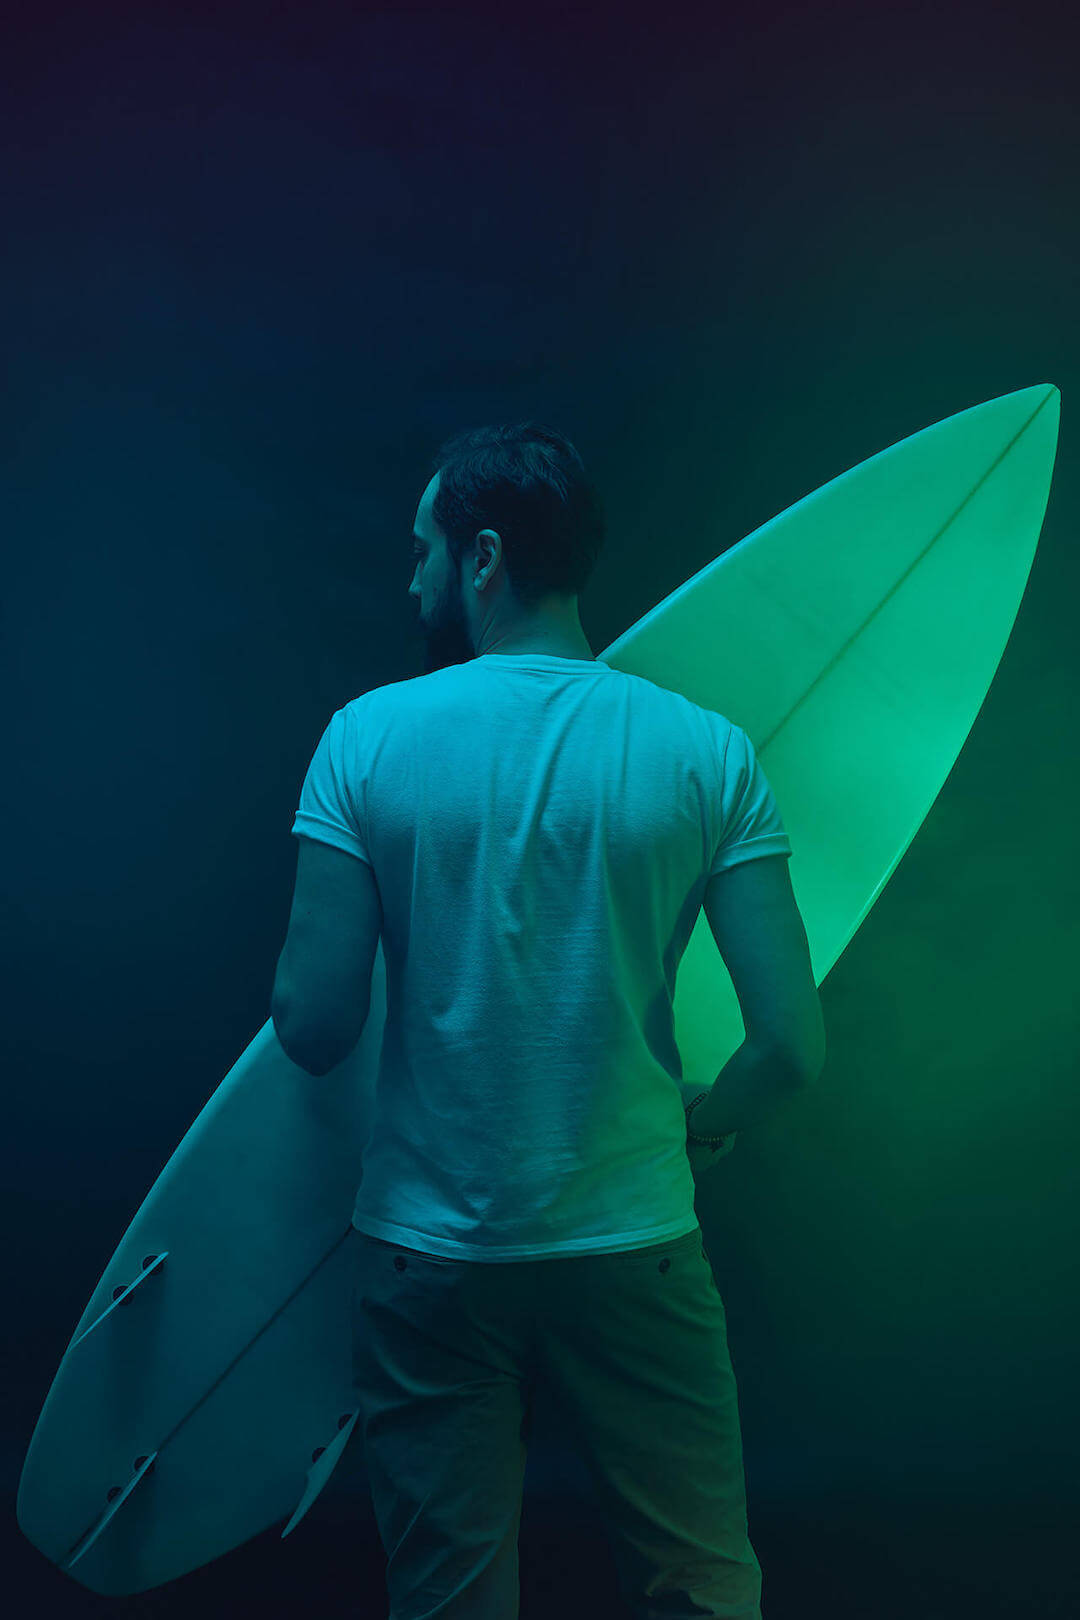 Bearded man with a surfboard in a neon photo session